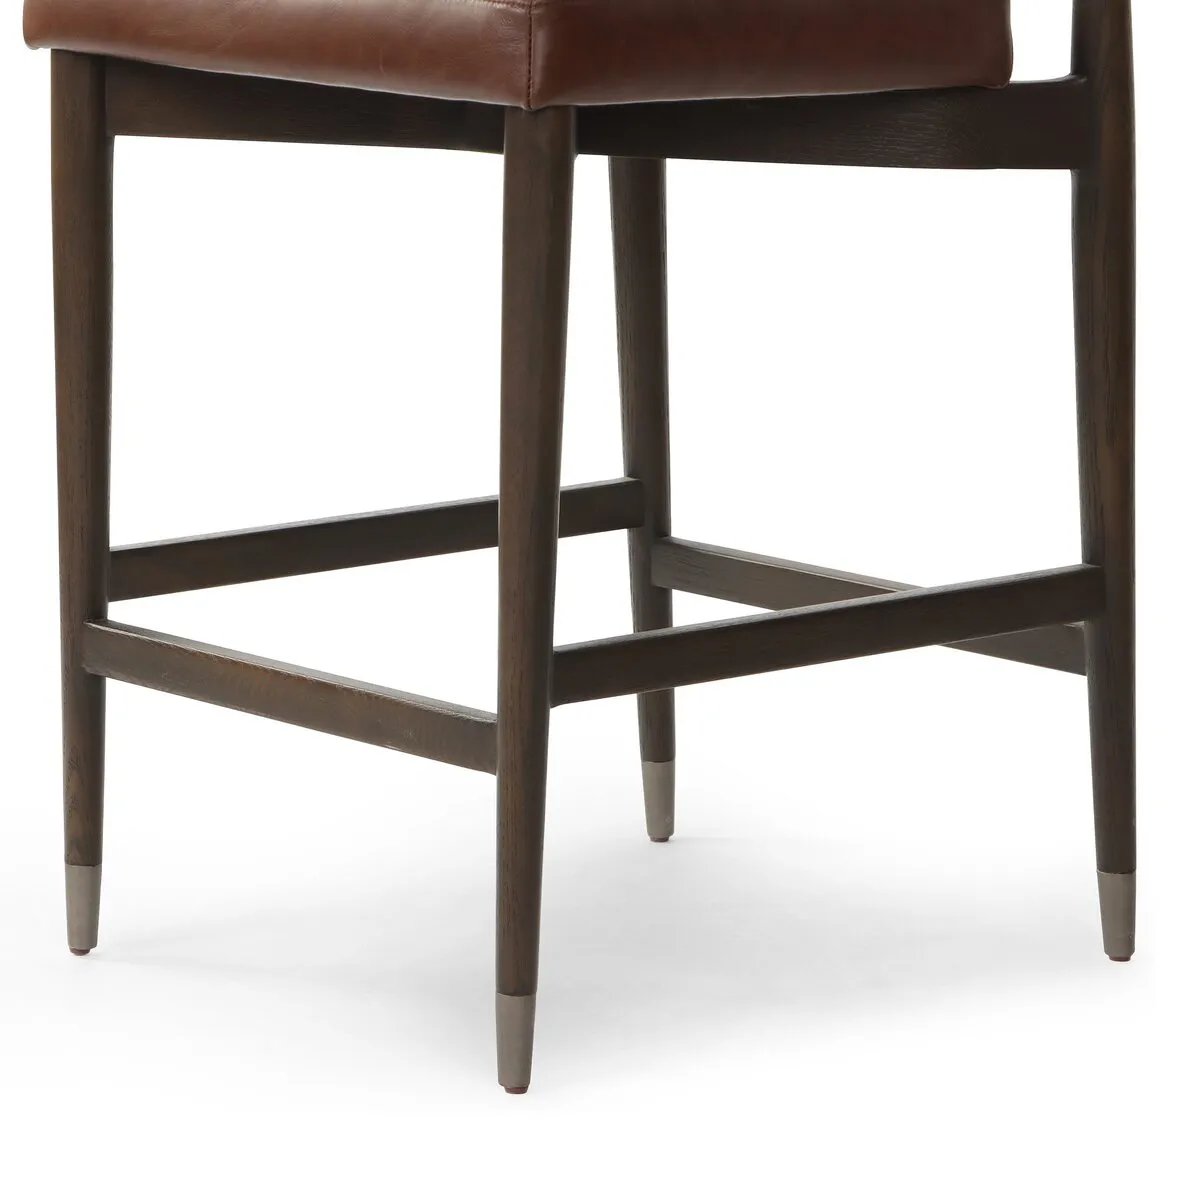 Crafted with a sleek Havana Brown finish, the Anton Bar + Counter Stool adds a touch of elegance to any space. The sturdy construction and ergonomic design provide exceptional support, making it suitable for extended use. Perfect for both bar and counter heights, this versatile stool is sure to enhance your sitting experience. Amethyst Home provides interior design, new home construction design consulting, vintage area rugs, and lighting in the Winter Garden metro area.